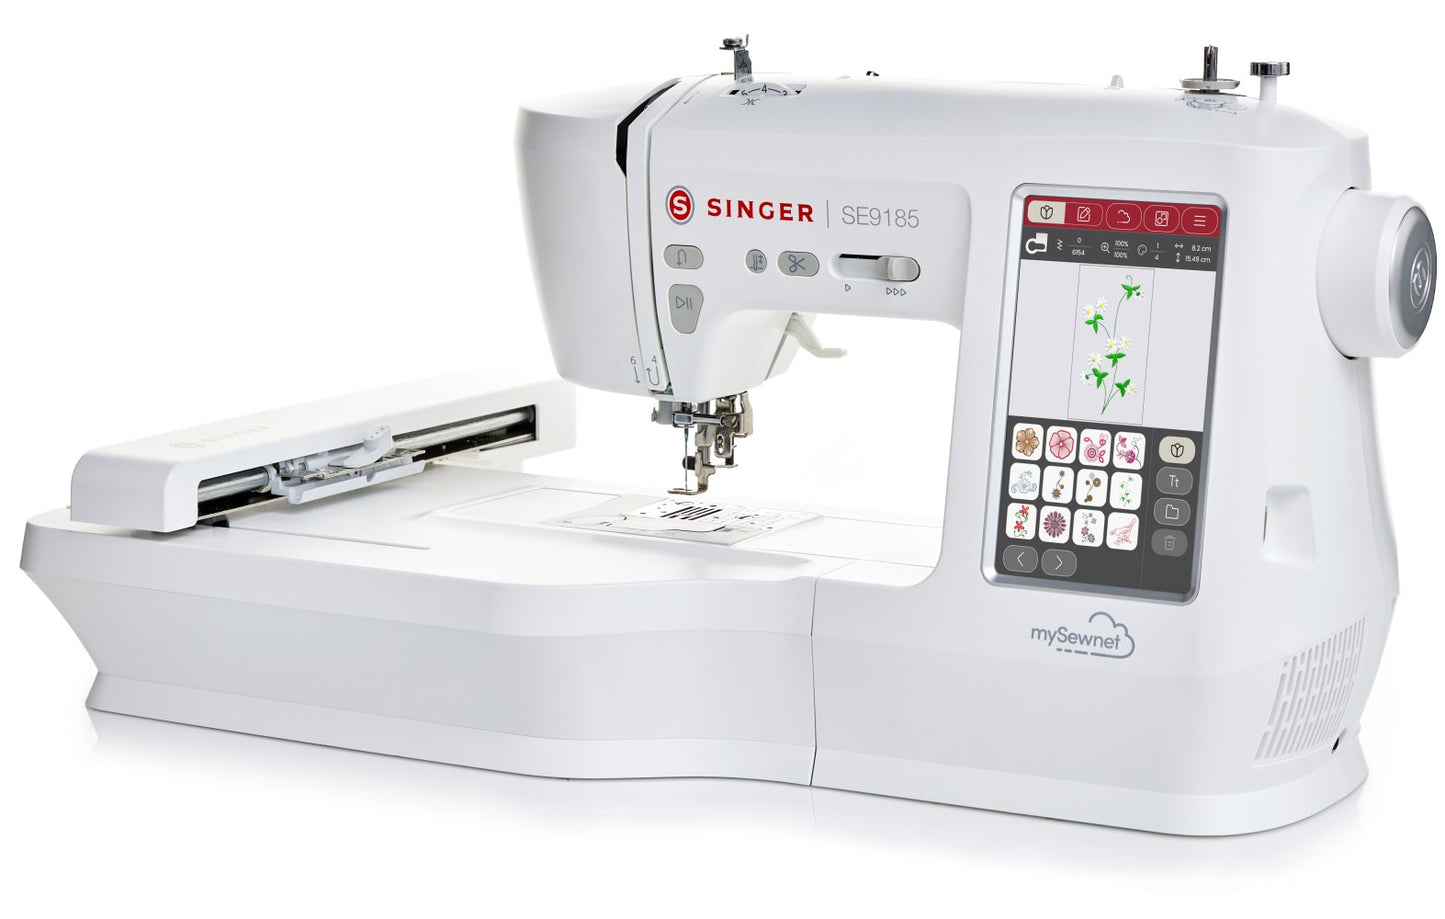 Singer SE9185 Sewing, Quilting and Embroidery machine with WIFI, colour touchscreen. Includes a 90 day trial of MySewNet embroidery software + FREE Singer Iron worth £49.99